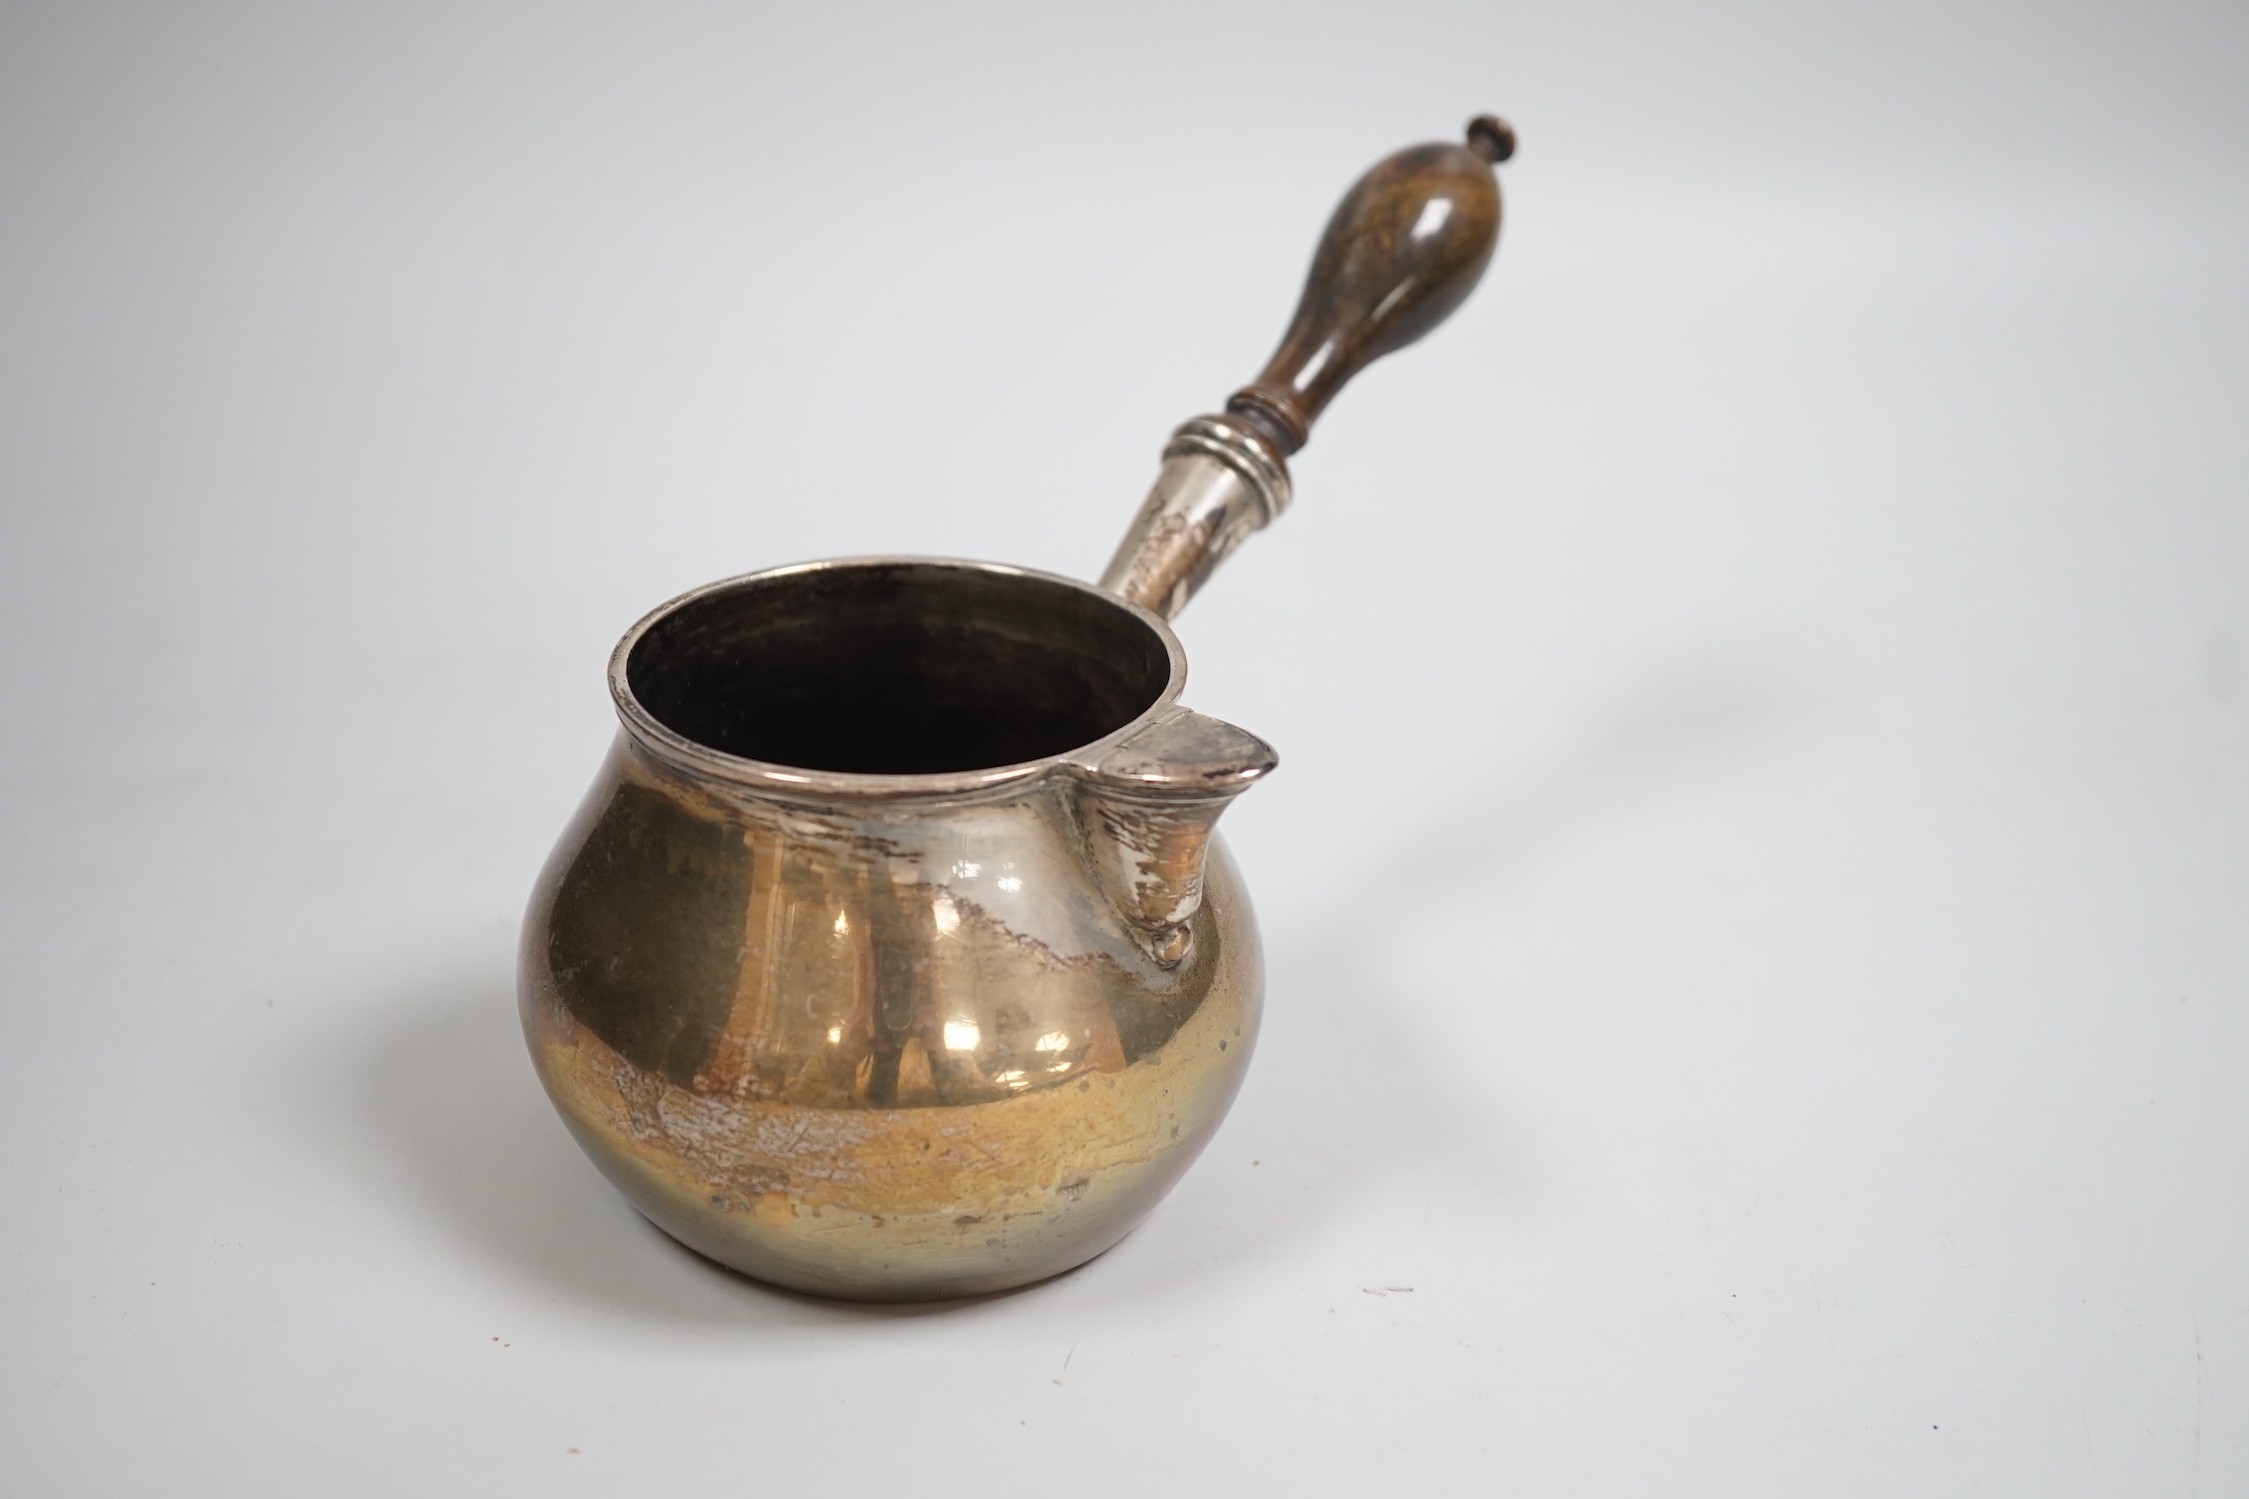 A late 18th/early 19th century white metal brandy warmer, with turned wooden handle and spout with hinged cover, stamped JH below an anchor, approx. 20cm in length, handle (a.f.).